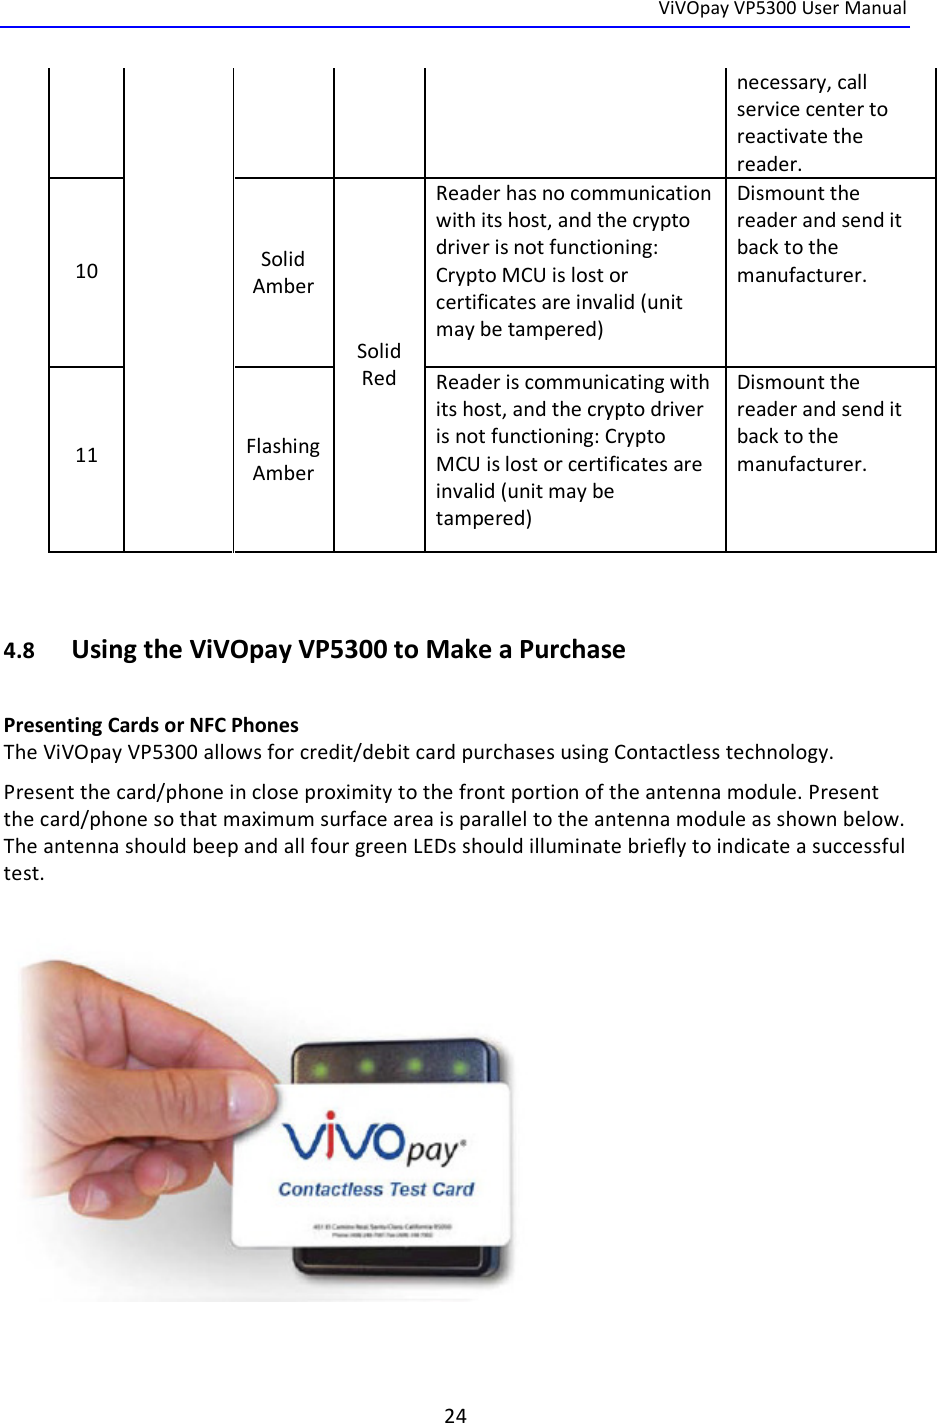  ViVOpay VP5300 User Manual   24  necessary, call service center to reactivate the reader. 10    Solid Amber Solid Red Reader has no communication with its host, and the crypto driver is not functioning: Crypto MCU is lost or certificates are invalid (unit may be tampered) Dismount the reader and send it back to the manufacturer. 11    Flashing Amber Reader is communicating with its host, and the crypto driver is not functioning: Crypto MCU is lost or certificates are invalid (unit may be tampered) Dismount the reader and send it back to the manufacturer.   4.8 Using the ViVOpay VP5300 to Make a Purchase  Presenting Cards or NFC Phones The ViVOpay VP5300 allows for credit/debit card purchases using Contactless technology. Present the card/phone in close proximity to the front portion of the antenna module. Present the card/phone so that maximum surface area is parallel to the antenna module as shown below. The antenna should beep and all four green LEDs should illuminate briefly to indicate a successful test.   